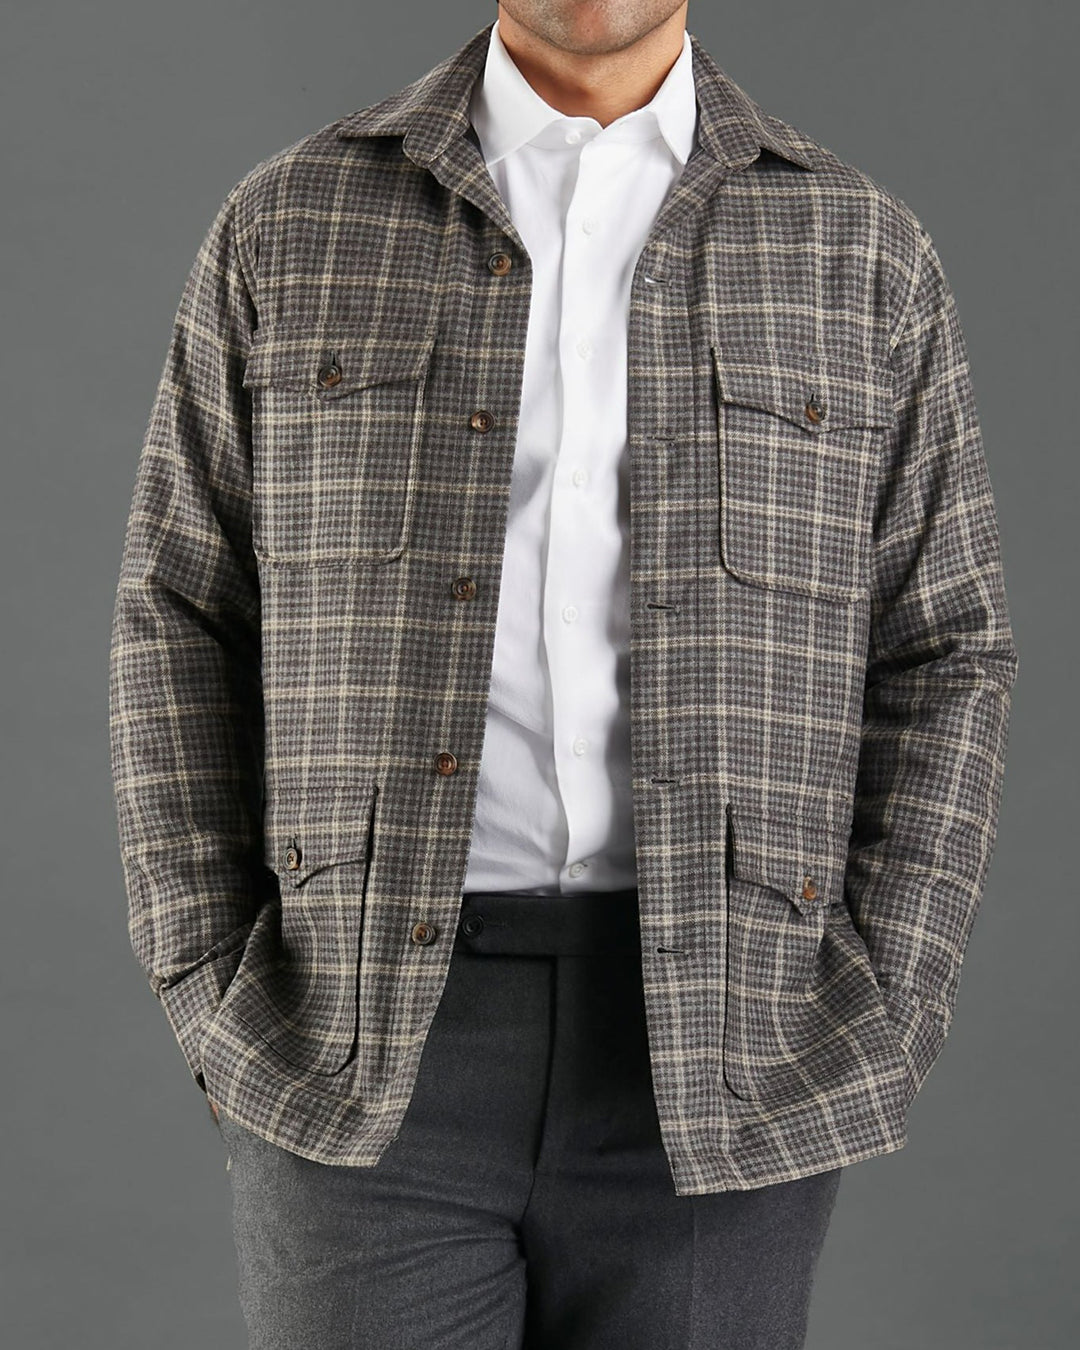 Front of model wearing the shirt jacket for men by Luxire in brown and grey overchecks